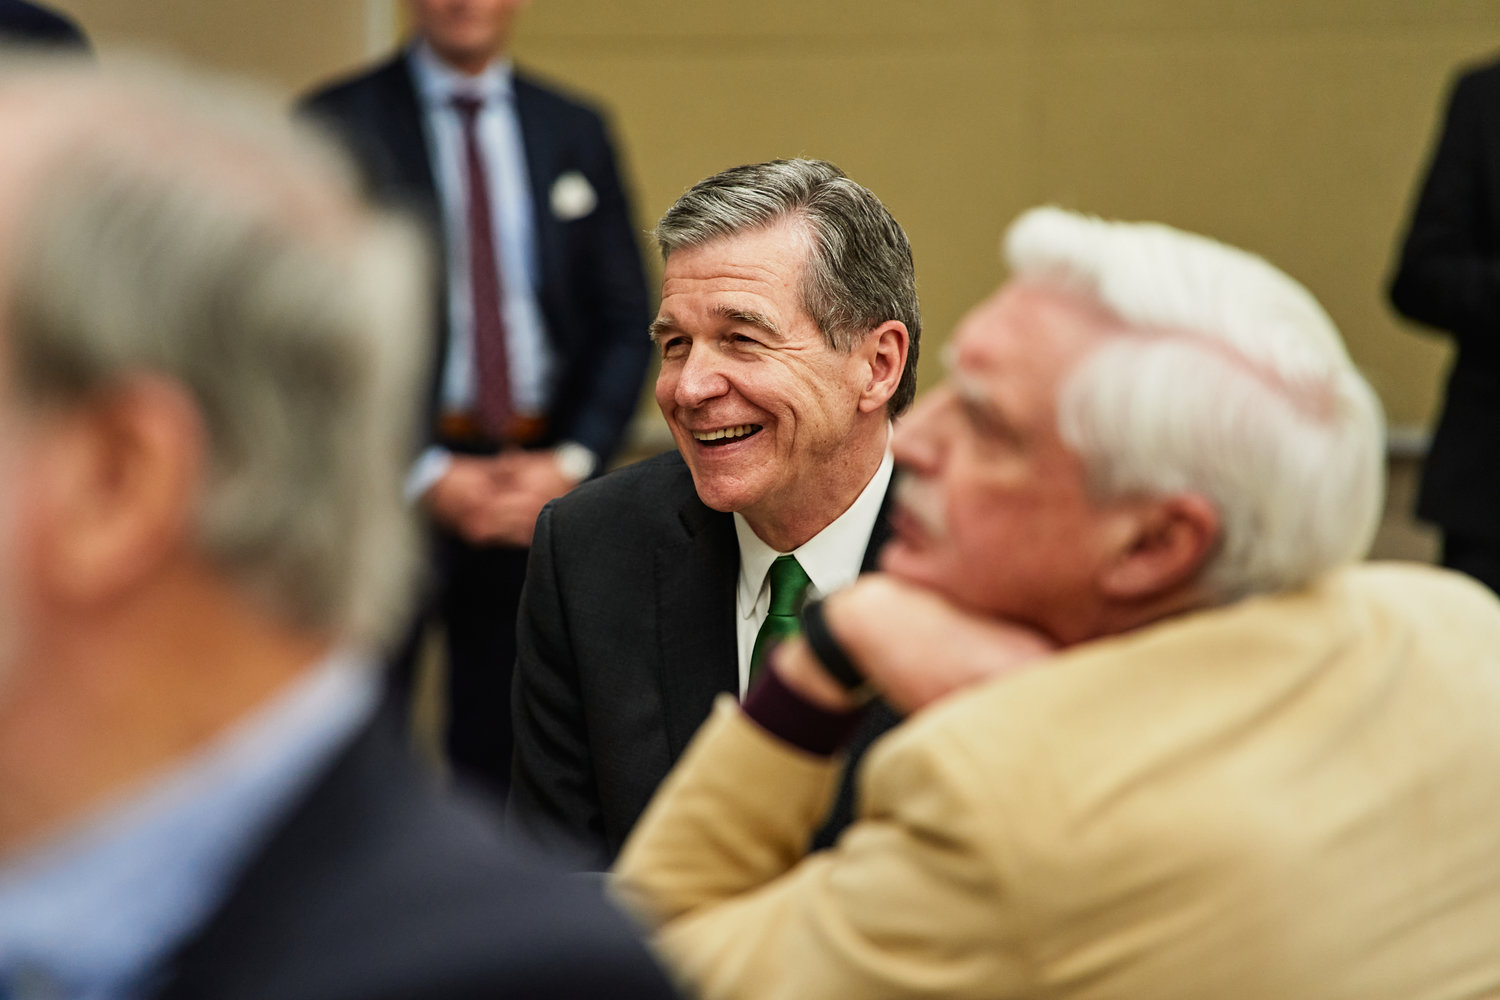 Gov. Roy Cooper visited Chatham County Democrats at the Chatham County Agriculture & Conference Center.